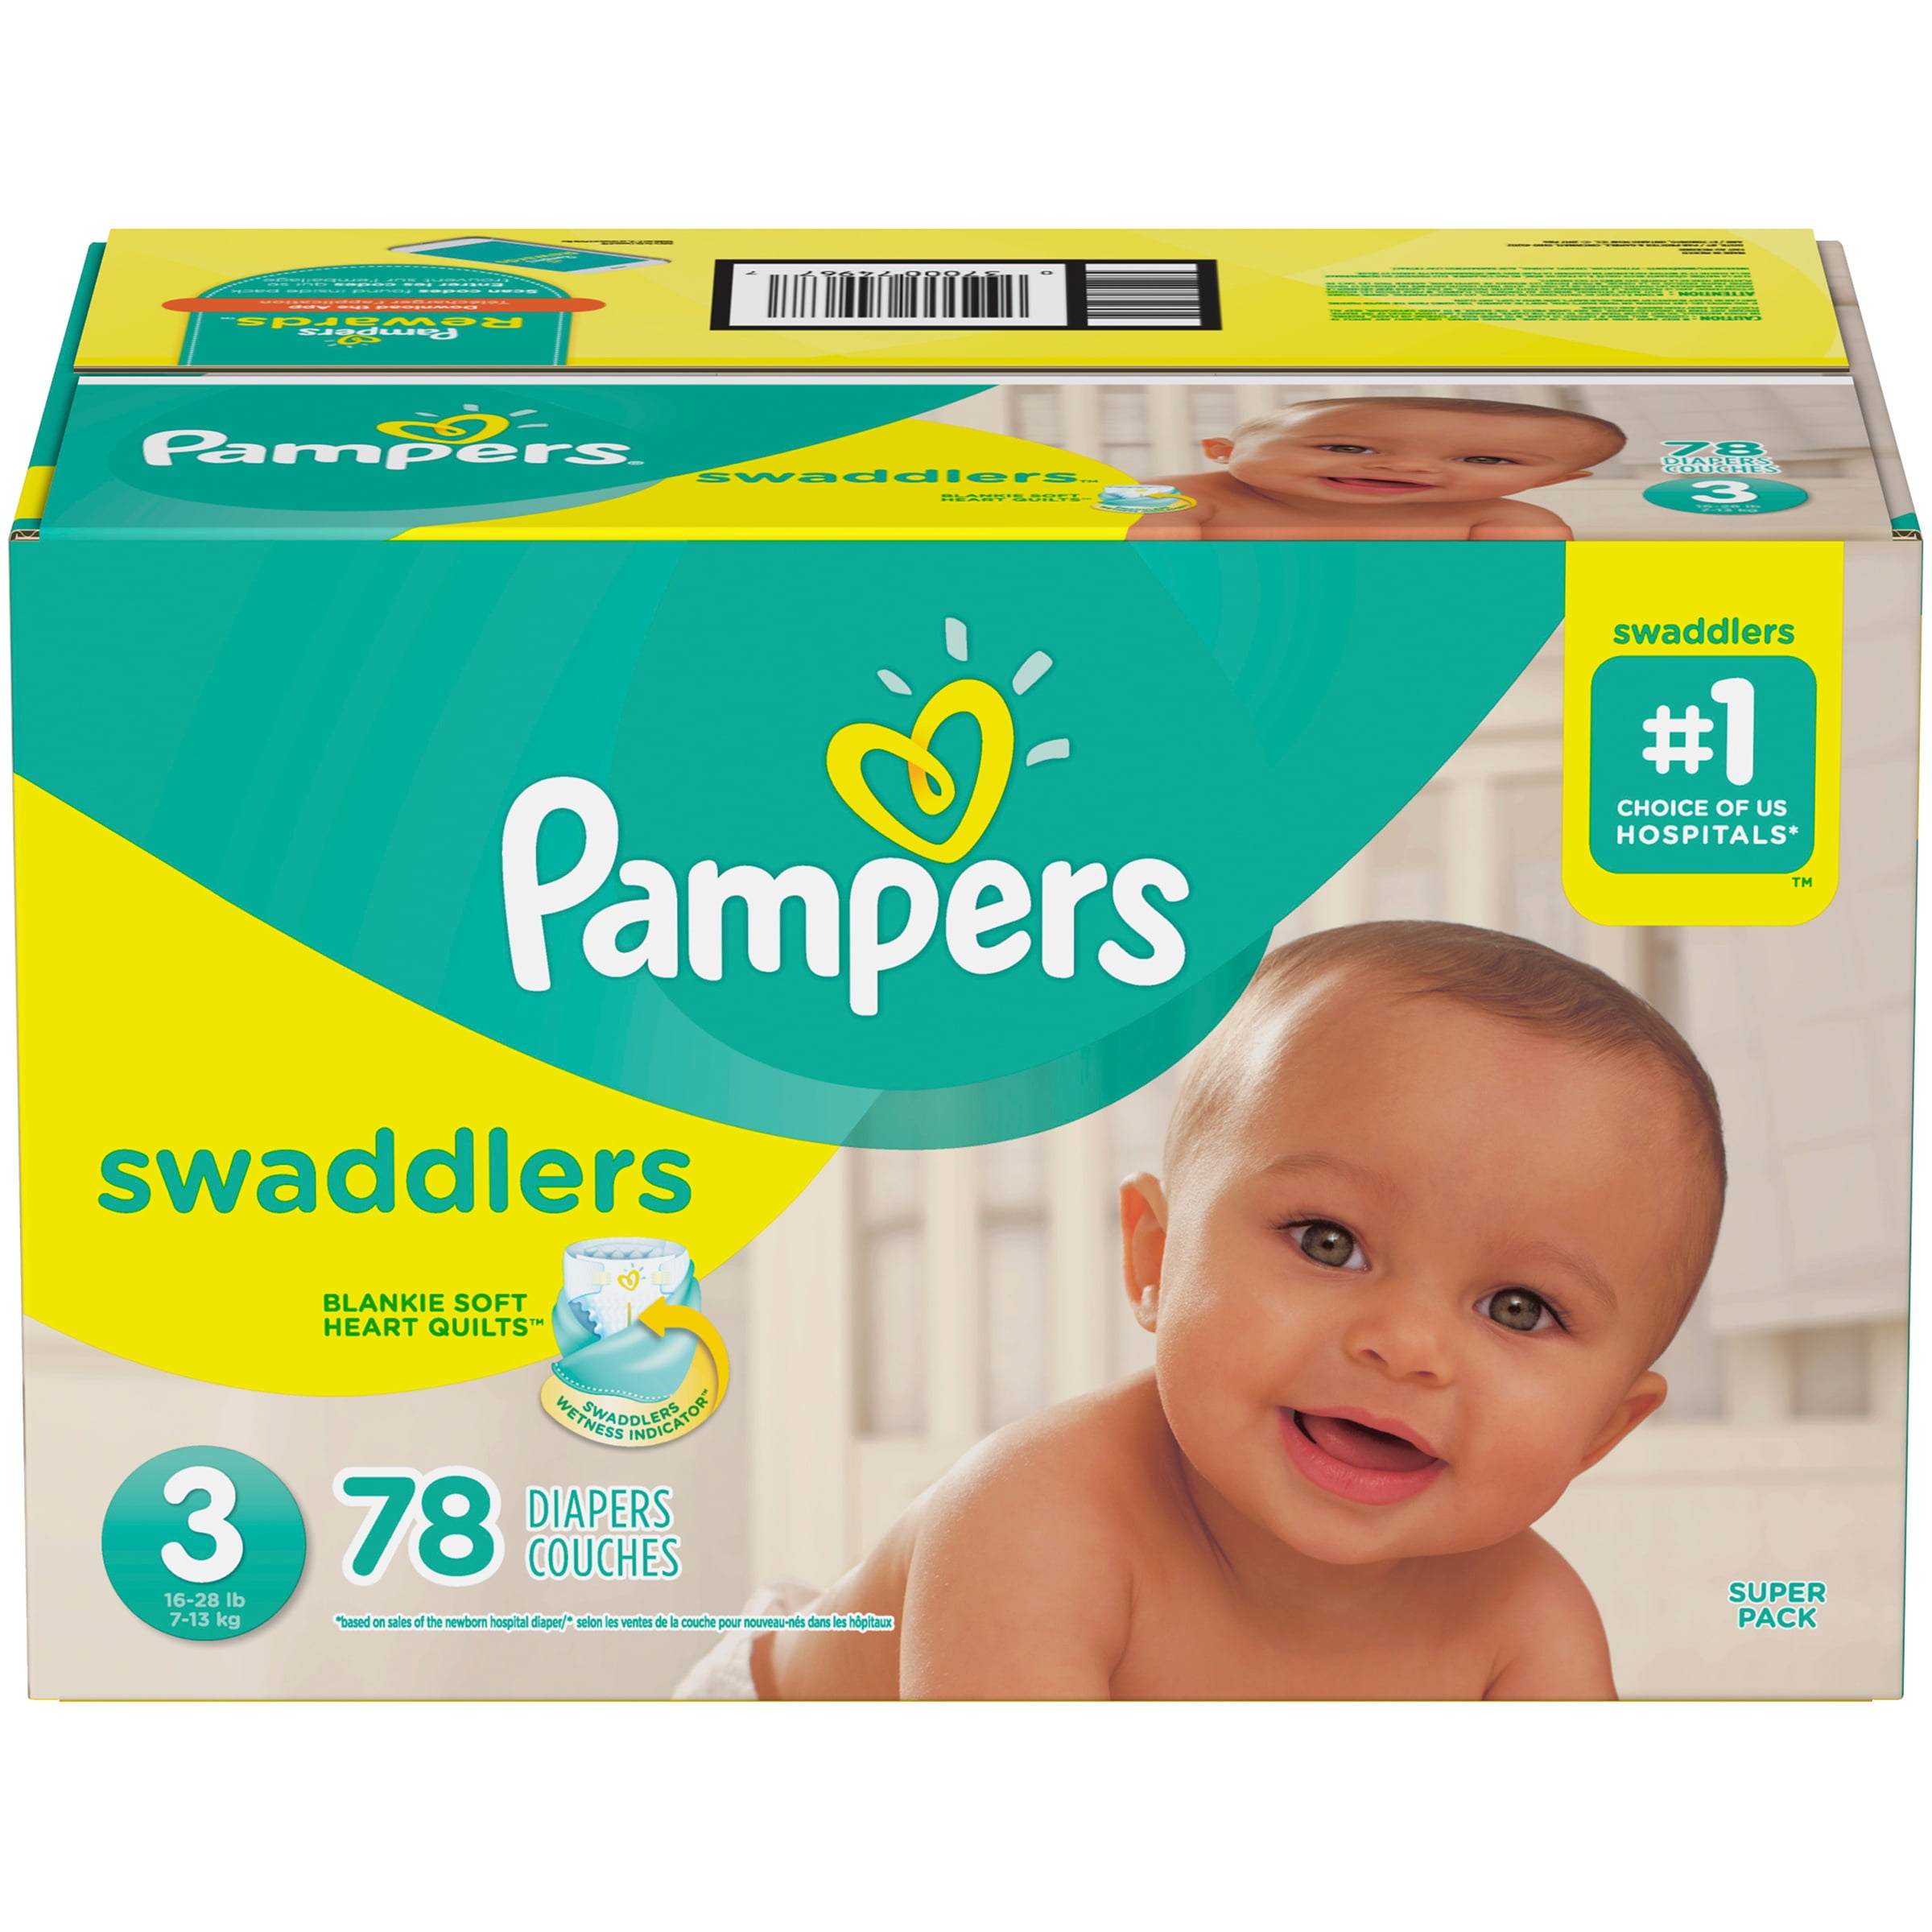 3 lata i pampers